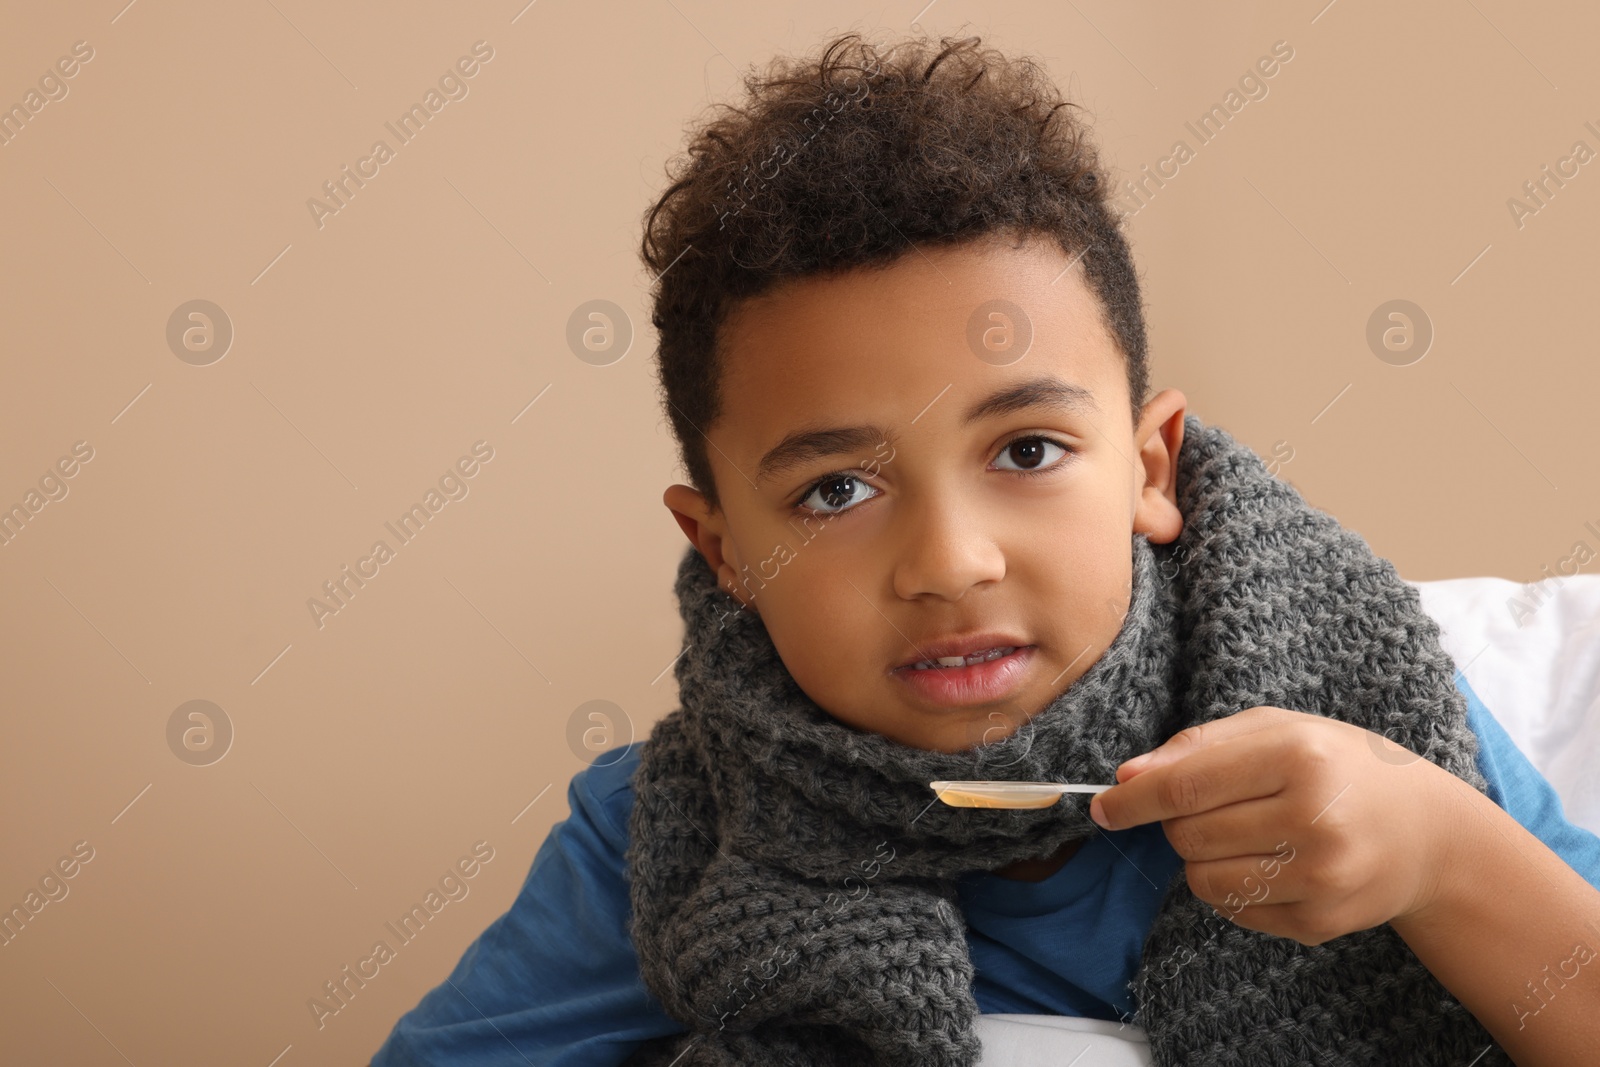 Photo of African-American boy taking cough syrup on bed at home, space for text. Cold medicine